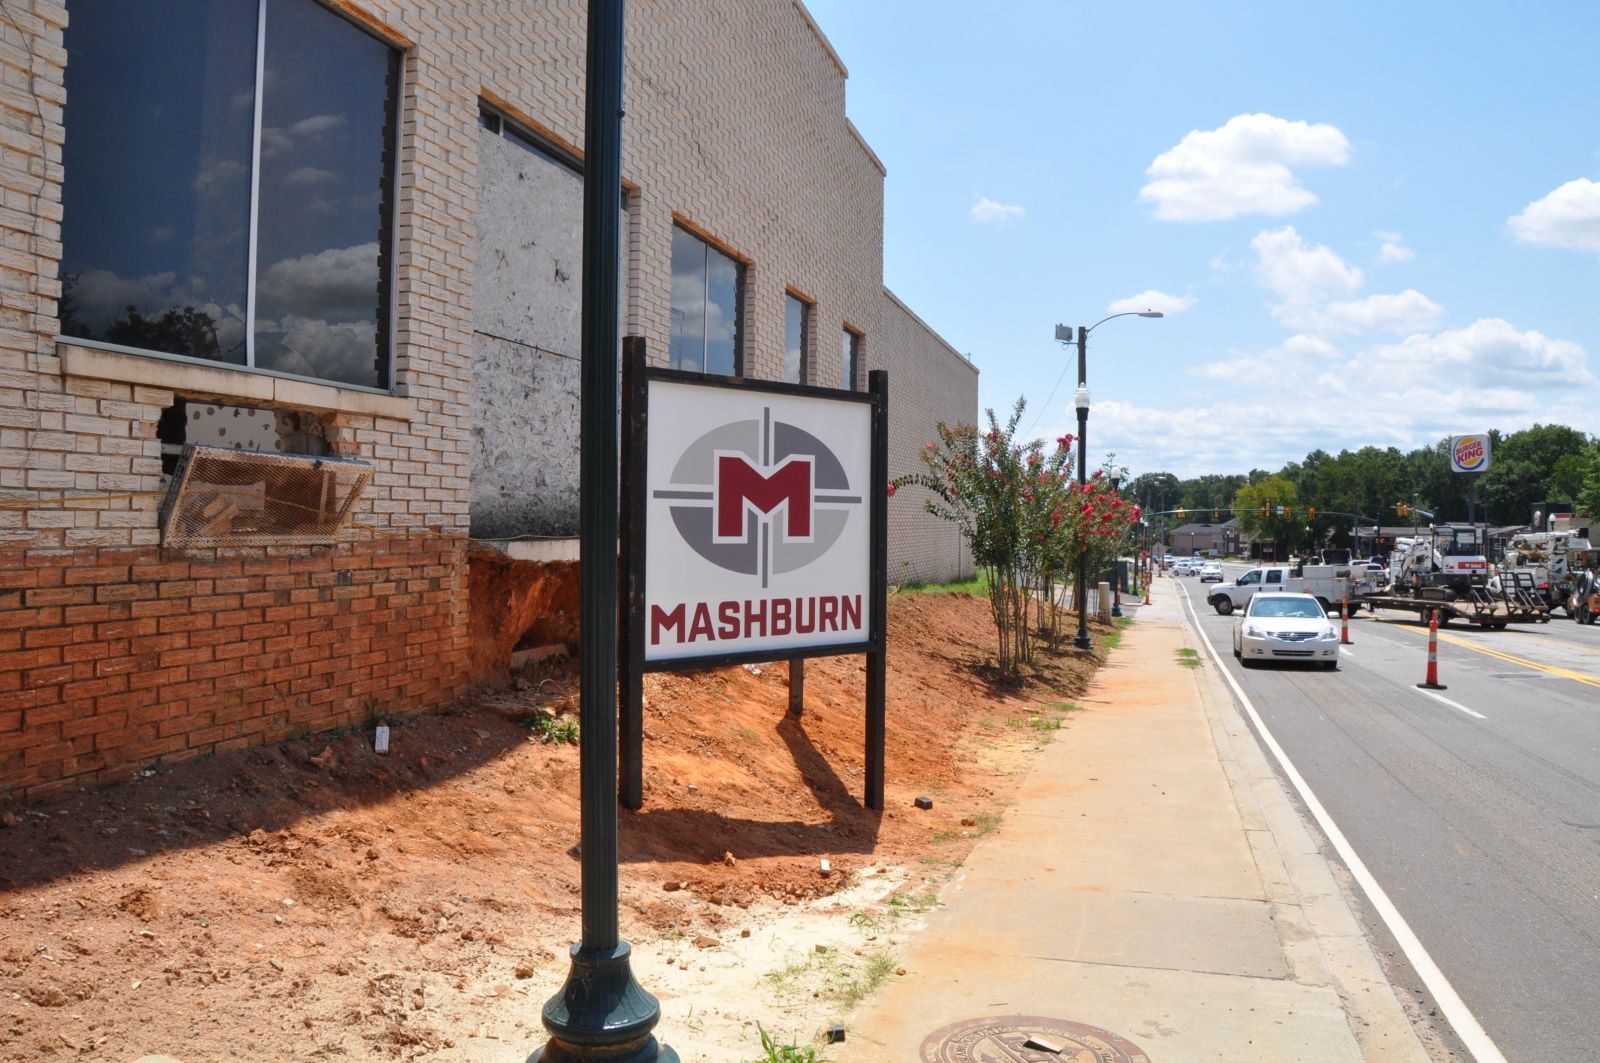 Though Mashburn Construction saw revenue drop by around 30% in 2020, CEO Paul Mashburn said some projects postponed last year are back on the books in 2021. Mashburn's backlog, in fact, is on track to be the 